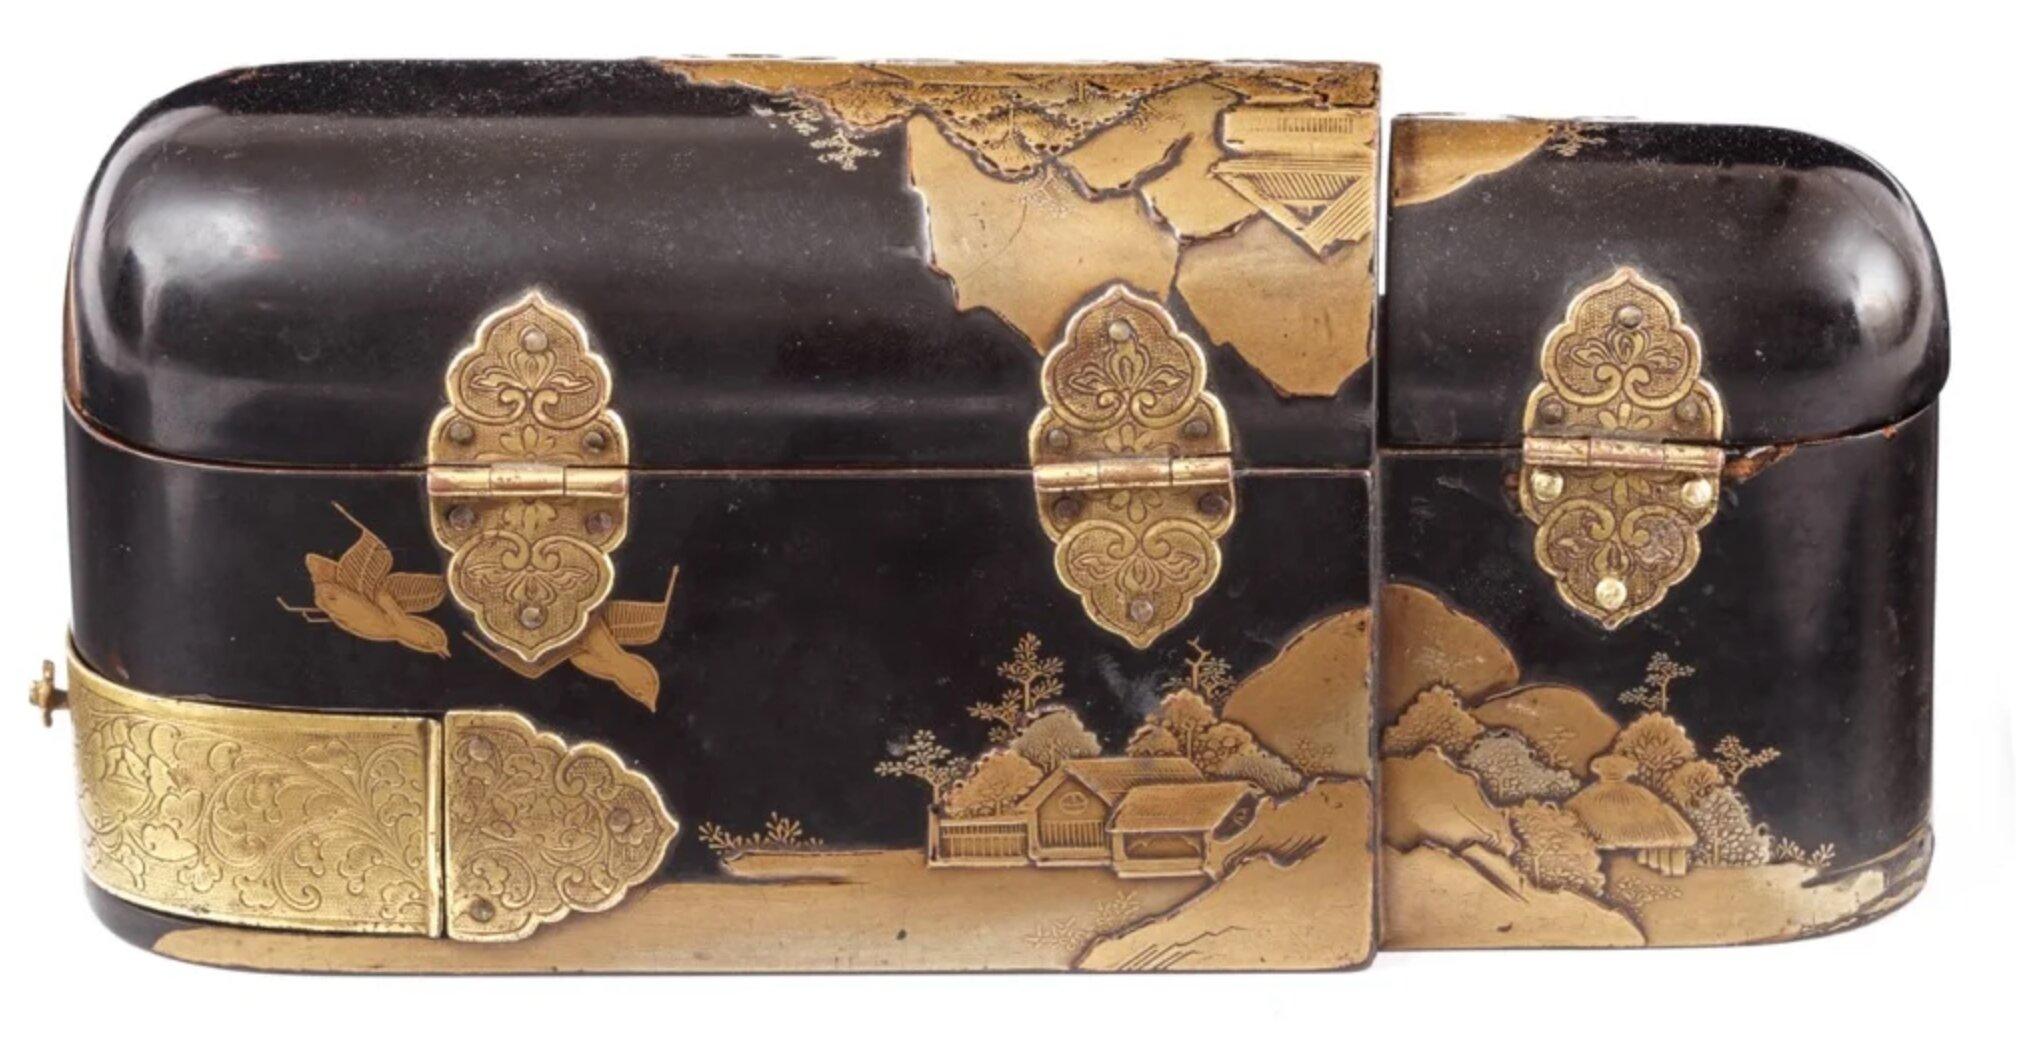 A rare Japanese export lacquer medical instrument box
Edo-period, 1650-1700


L. 19 x W. 6 x H. 8.5 cm

This unconventionally shaped lacquer box, decorated in the pictorial-style, reveals a highly specialist functionality. The cylinder-shaped